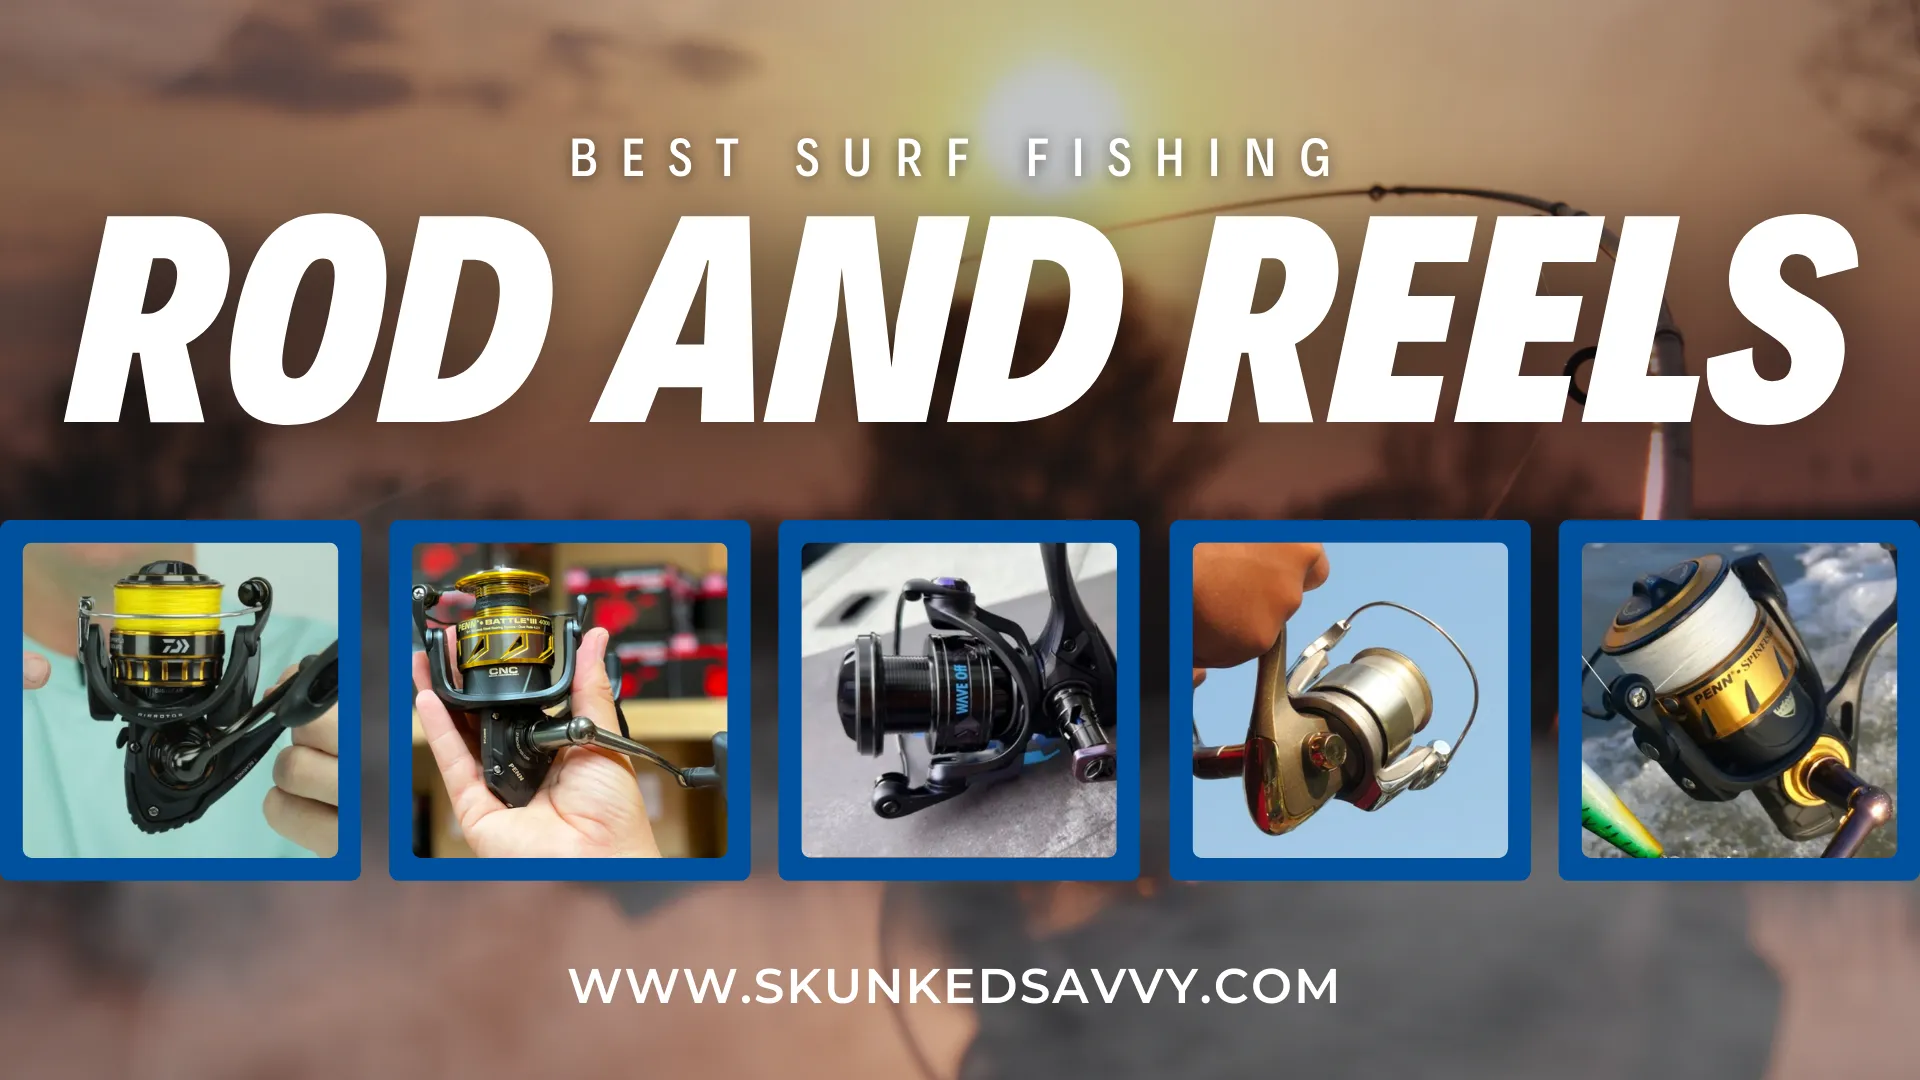 Best Surf Fishing Rod and Reels